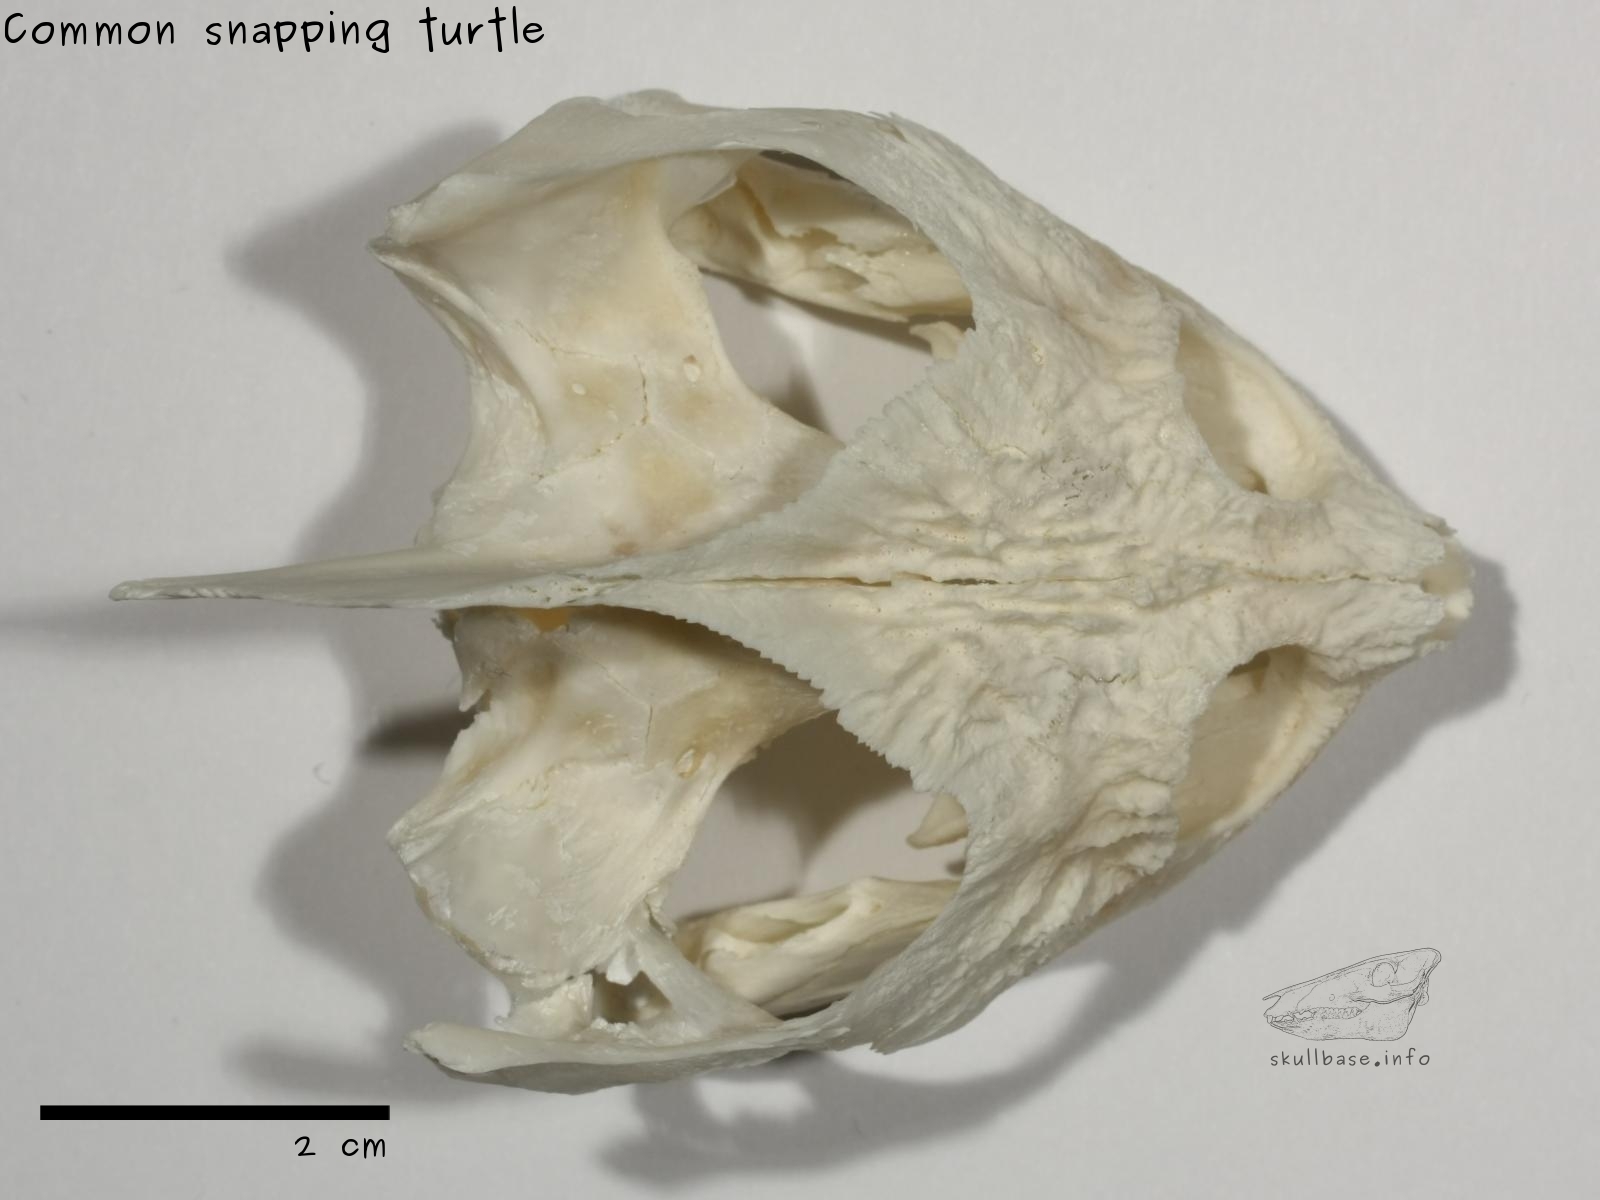 Common snapping turtle (Chelydra serpentina) skull dorsal view